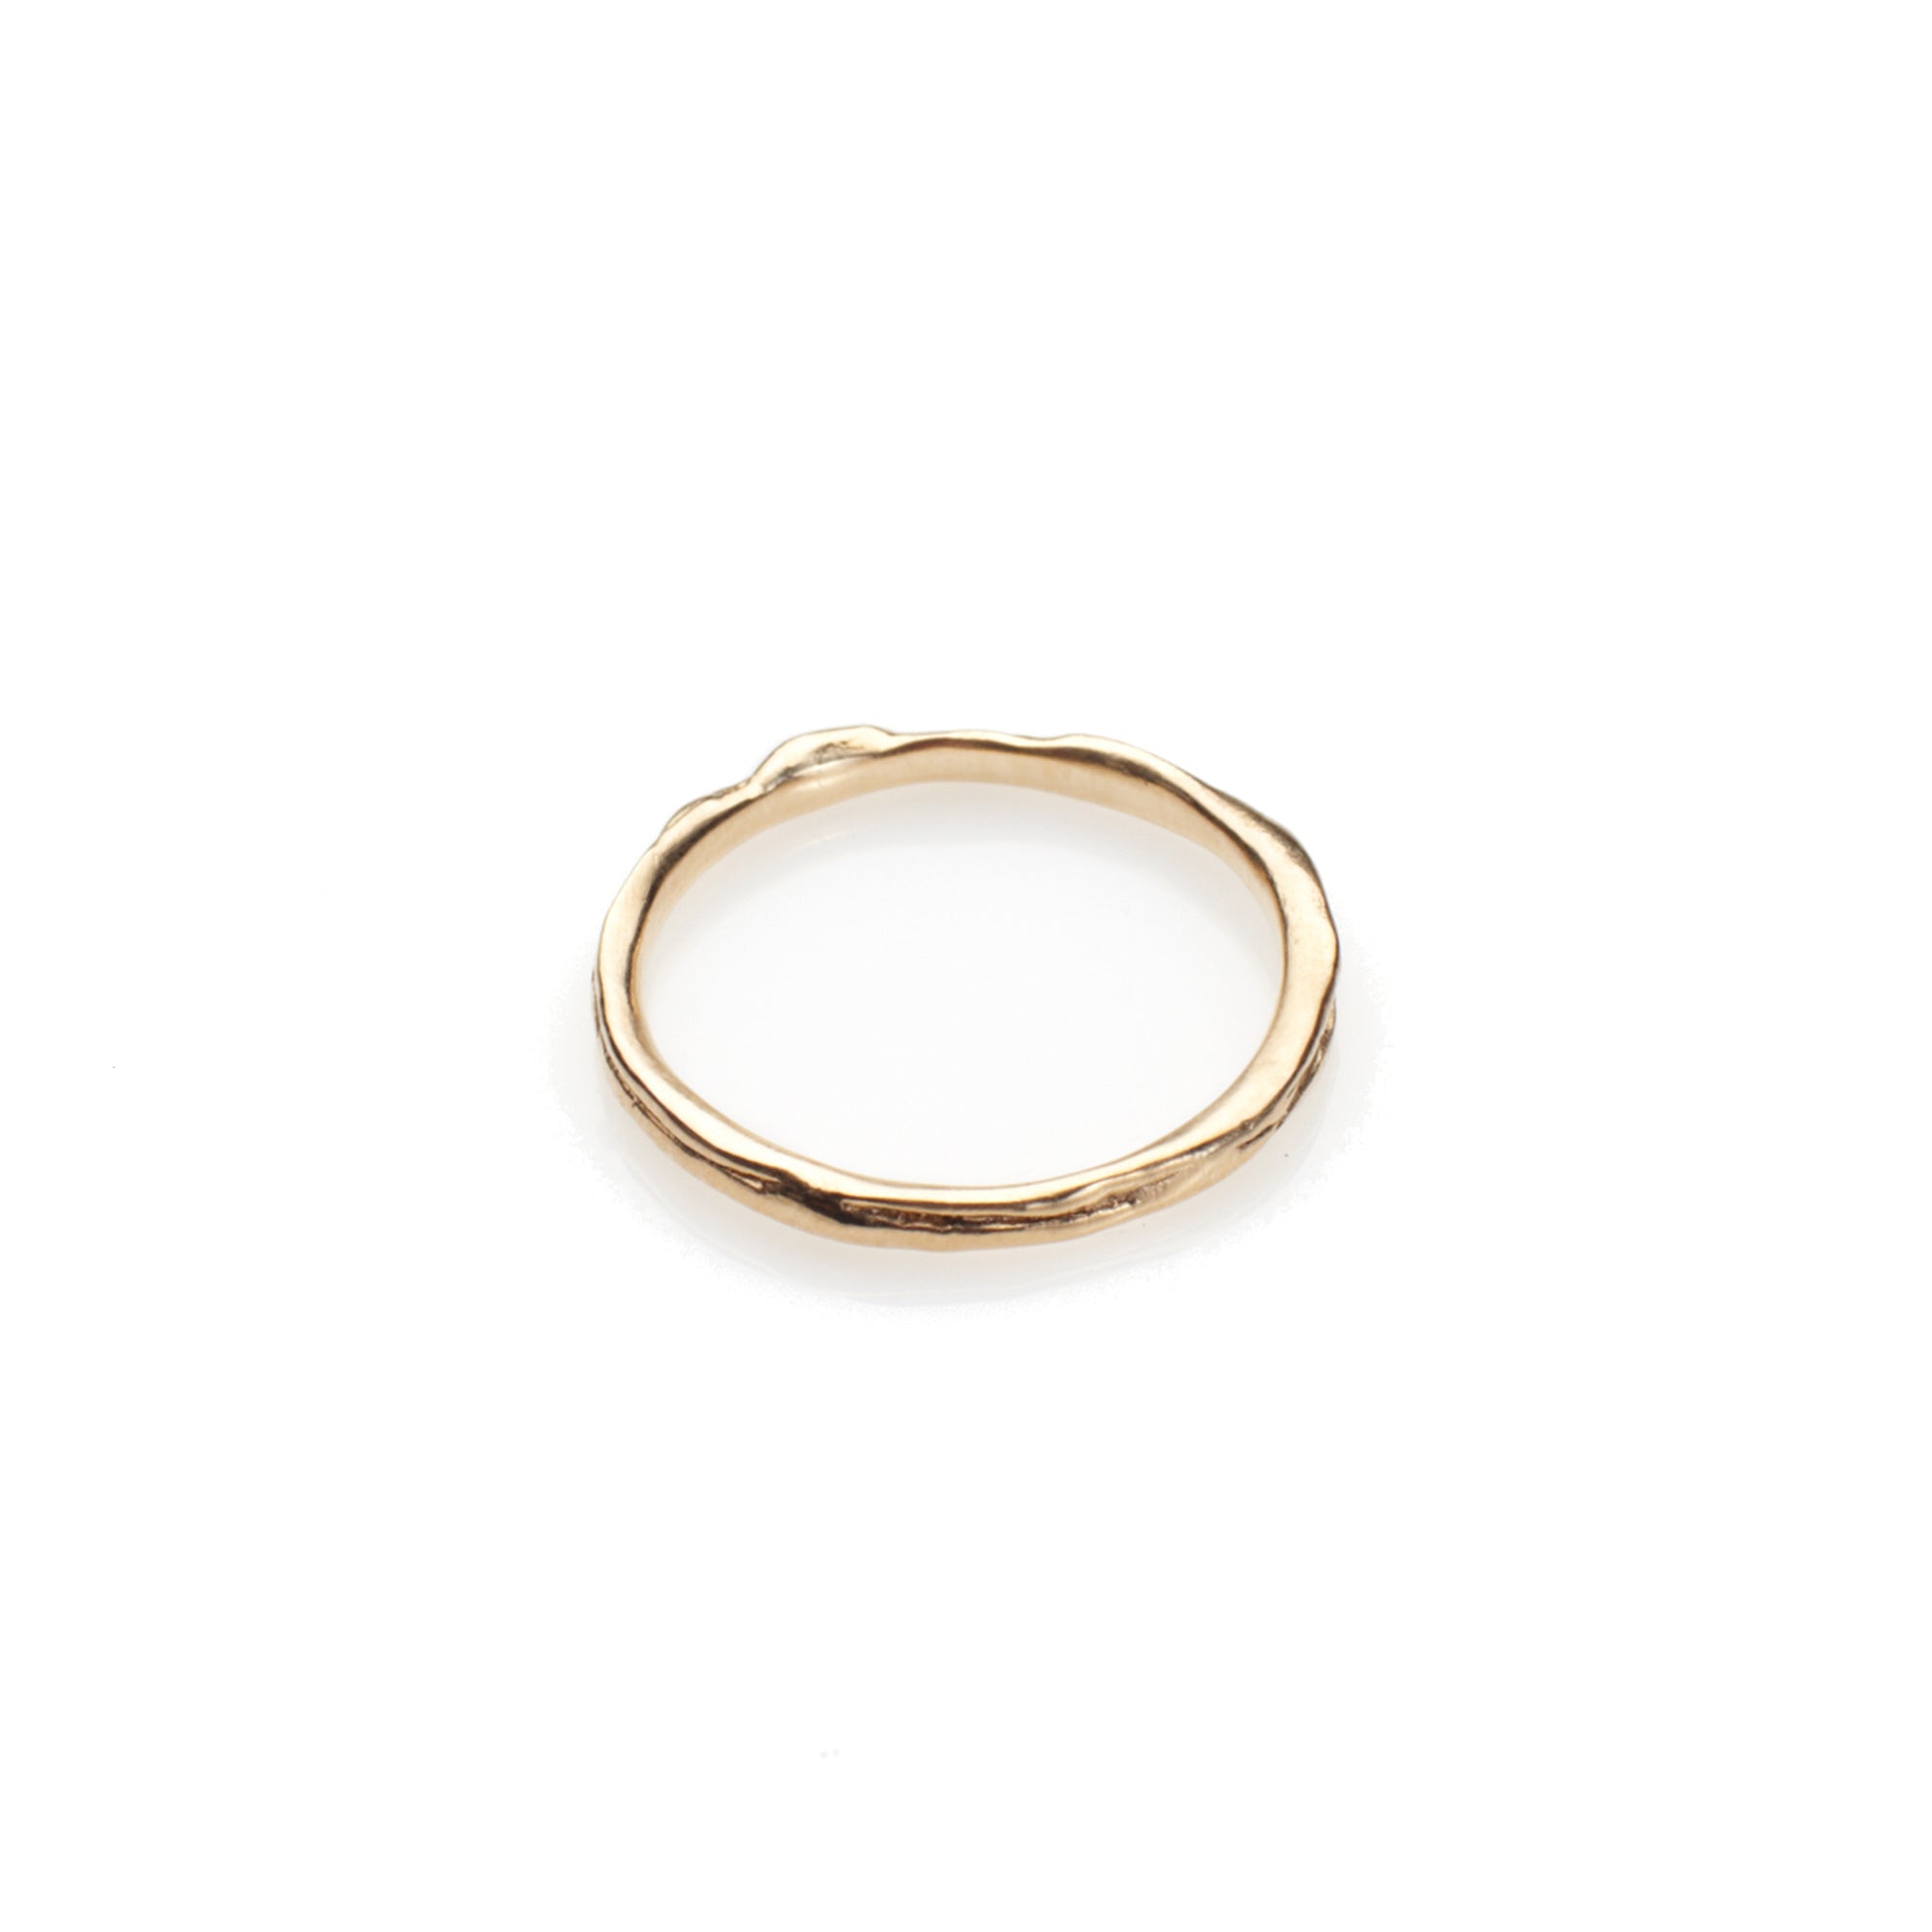 The Slip Band is thin gold ring featuring an organic texture. This subtle piece would work great stacked or worn on its own. 